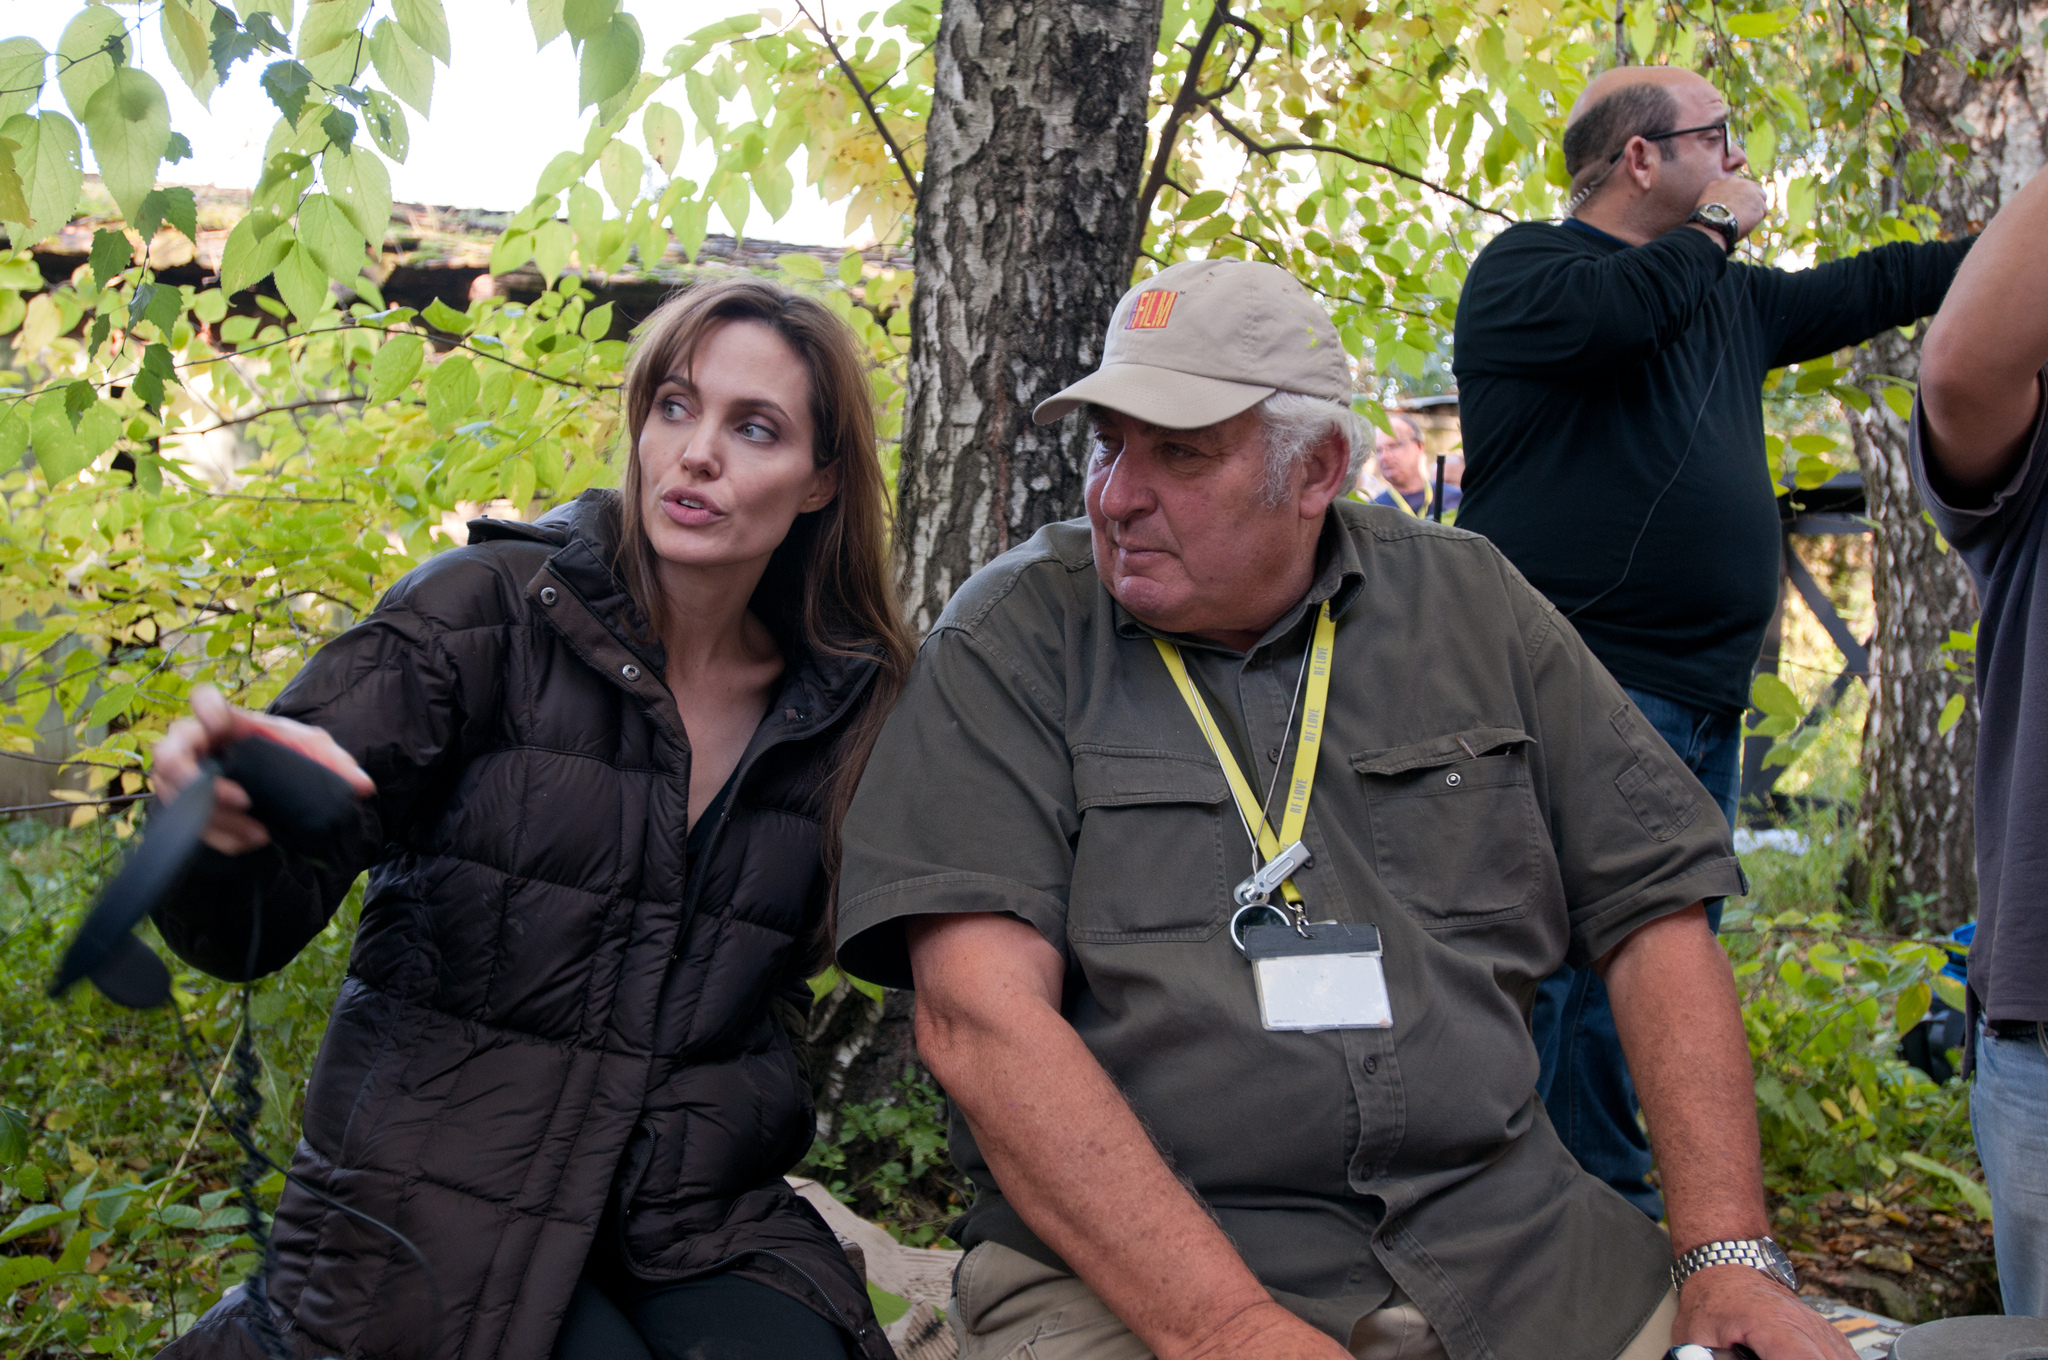 Angelina Jolie and Dean Semler in In the Land of Blood and Honey (2011)